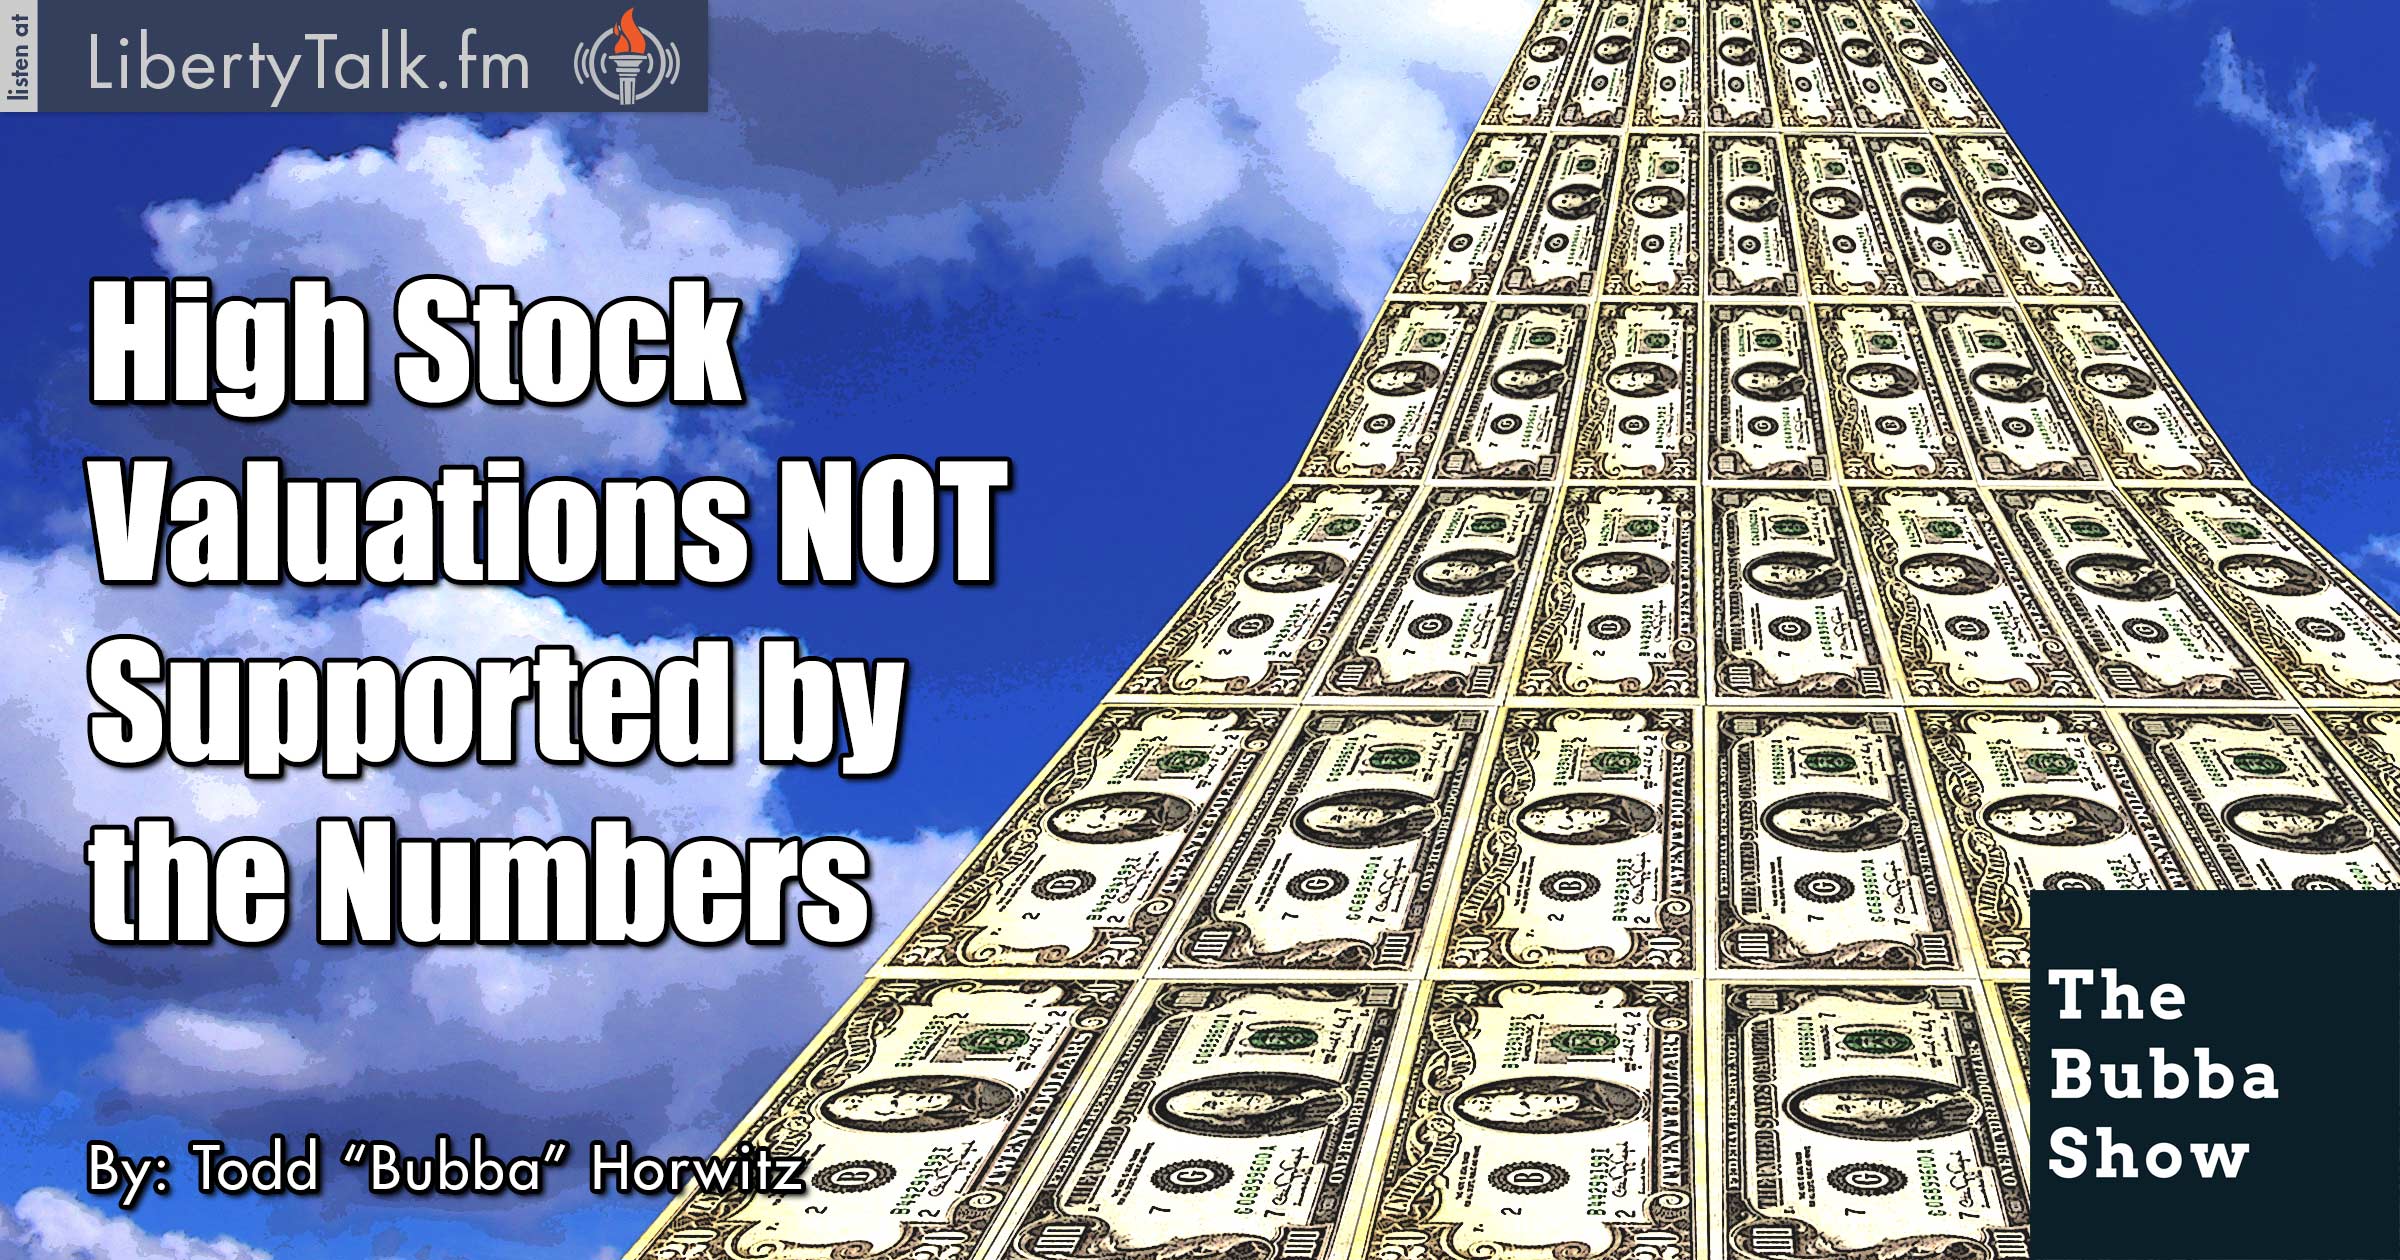 High Stock Valuations Not Supported by the Numbers - The Bubba Show